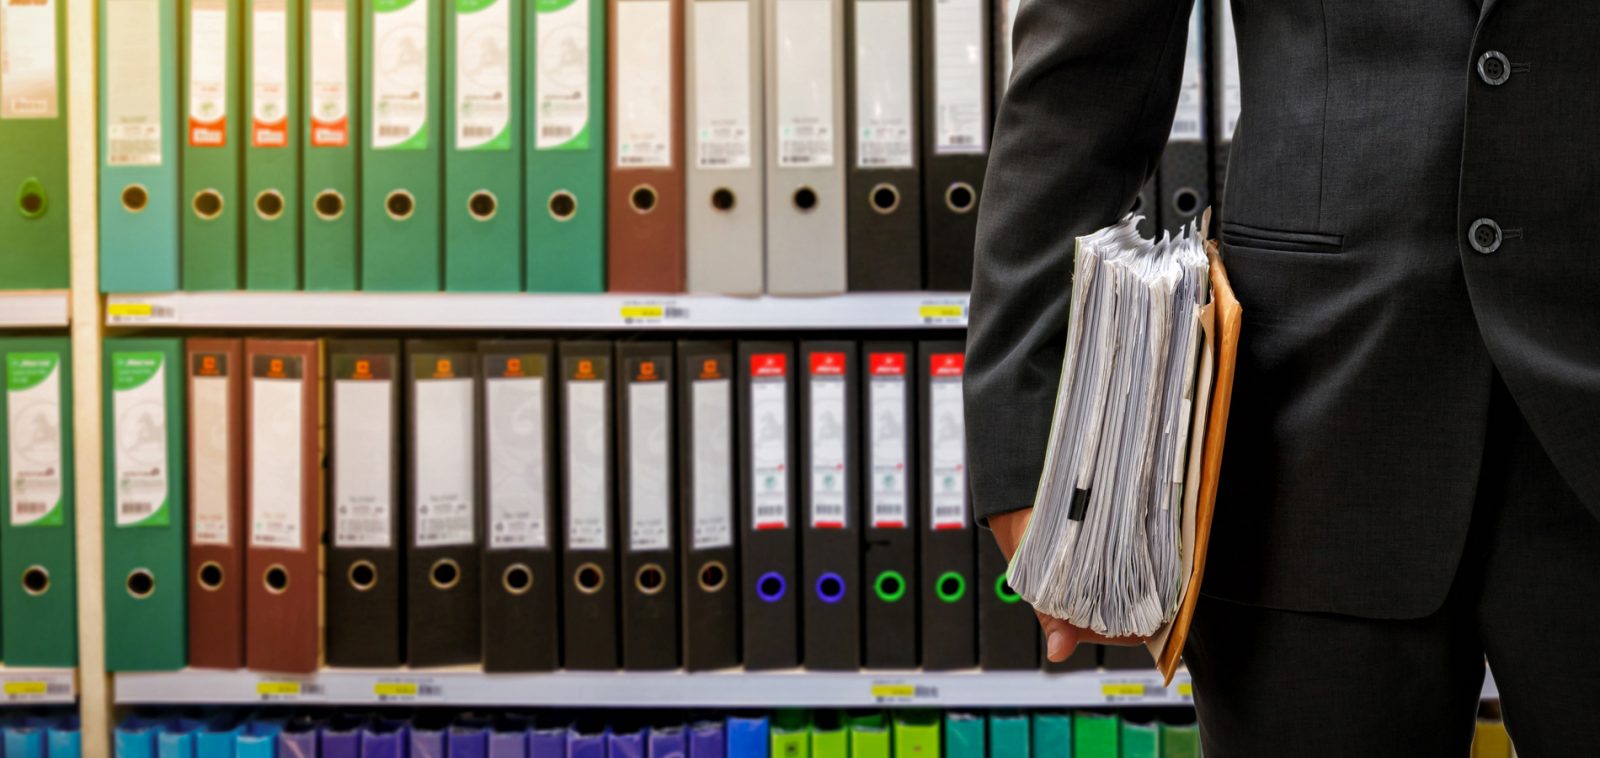 Learn about the advantages of using a document management system in an elementary school.